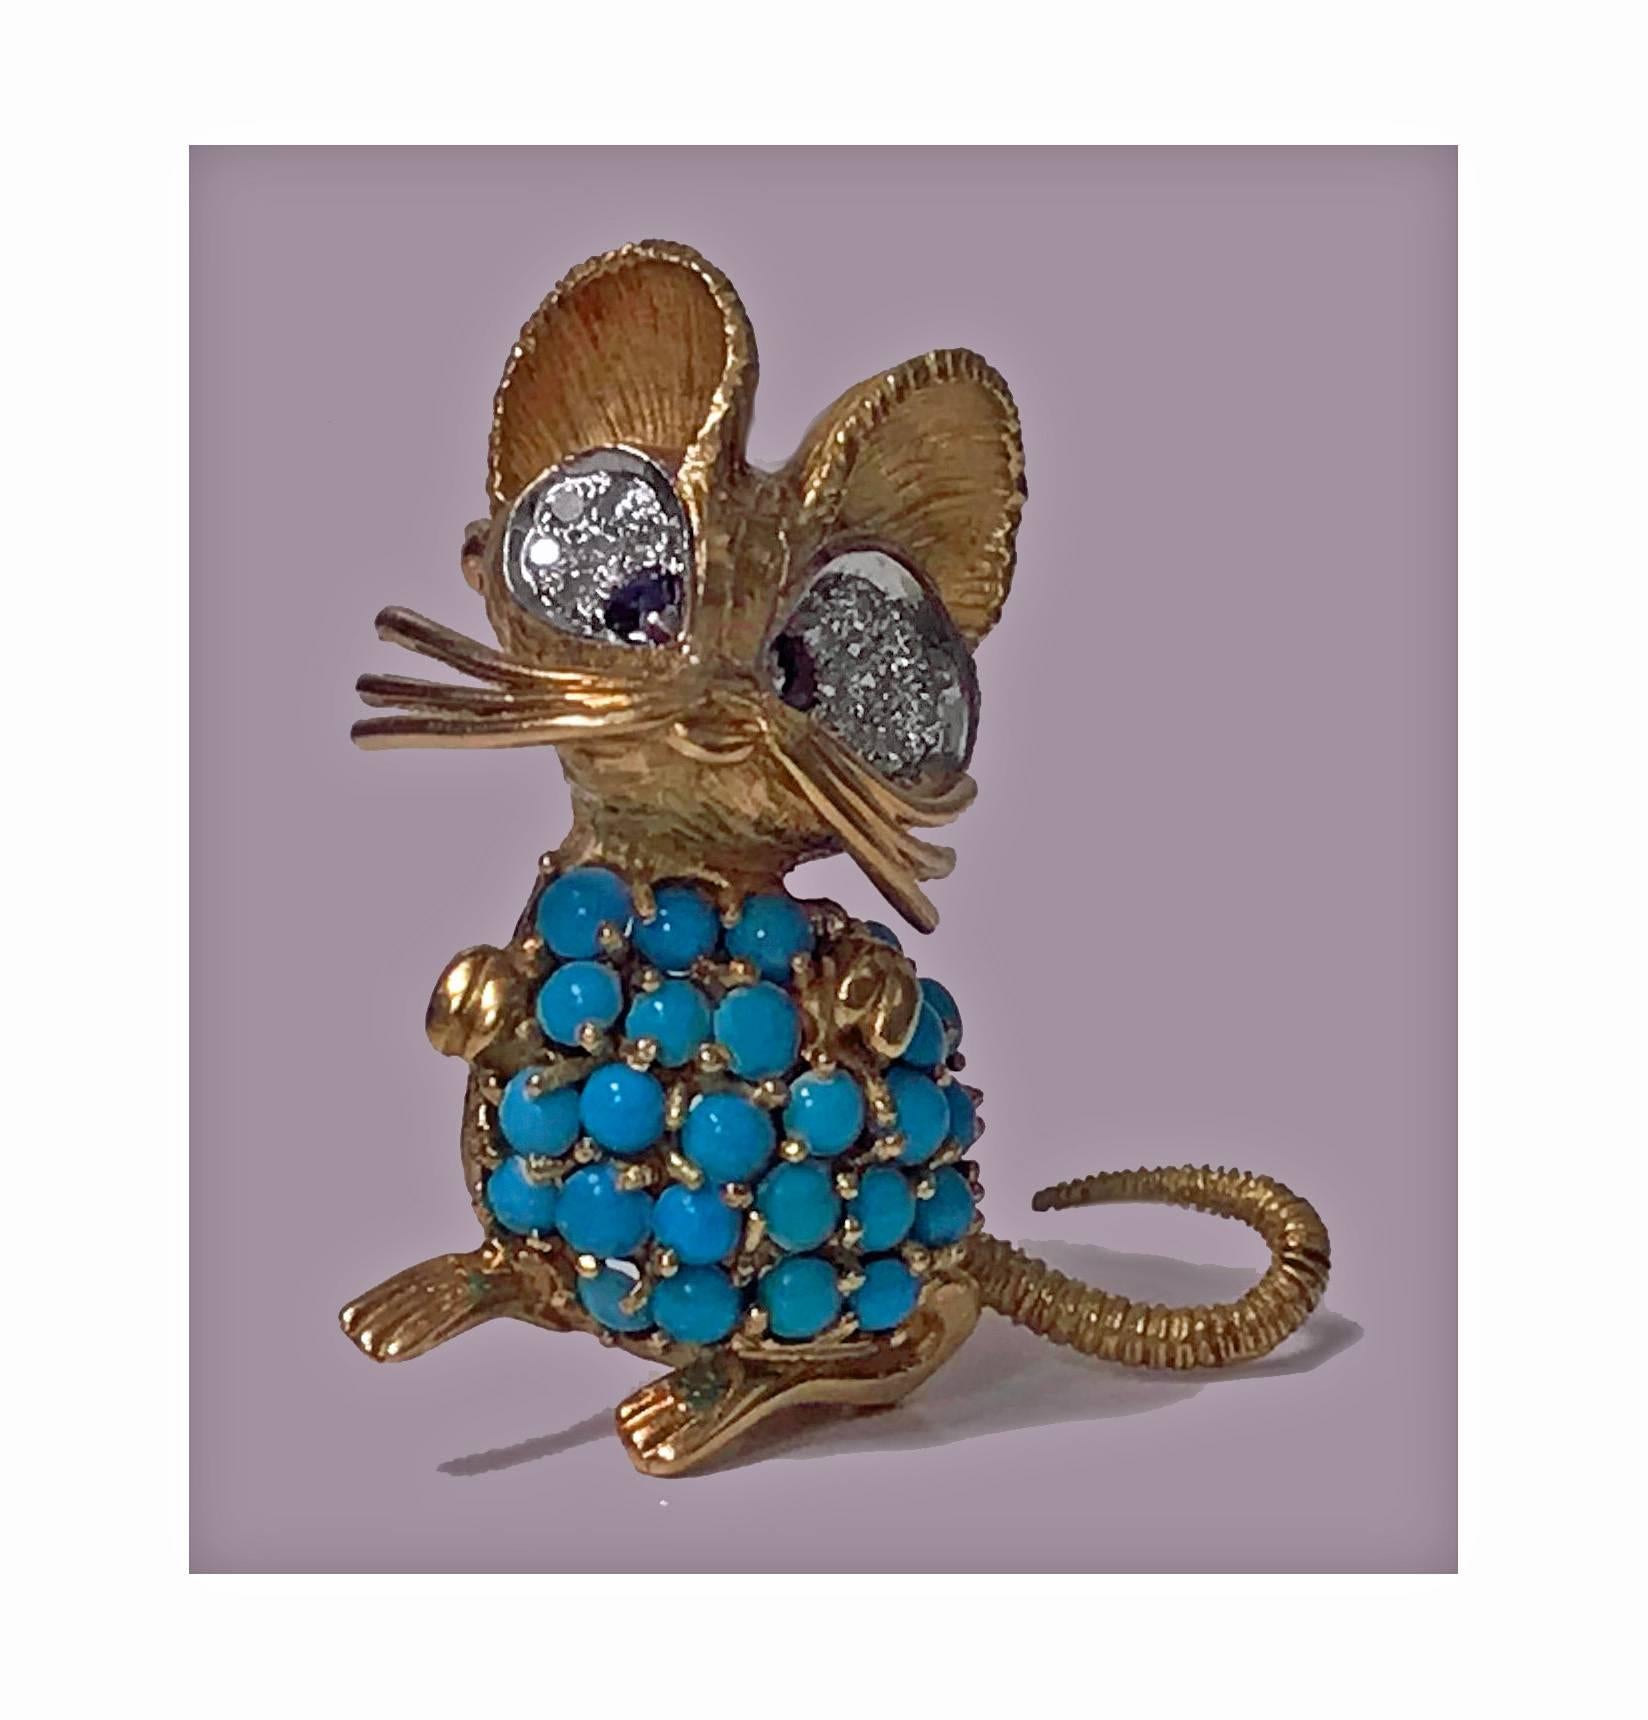 1970s whimsical mouse brooch pin 18-karat diamond, turquoise and sapphire. The body with 28 small cabochon turquoise, the eyes white gold set with 2 small round blue sapphire and a total of thirteen single cut diamonds, ears, whiskers, tail and feet